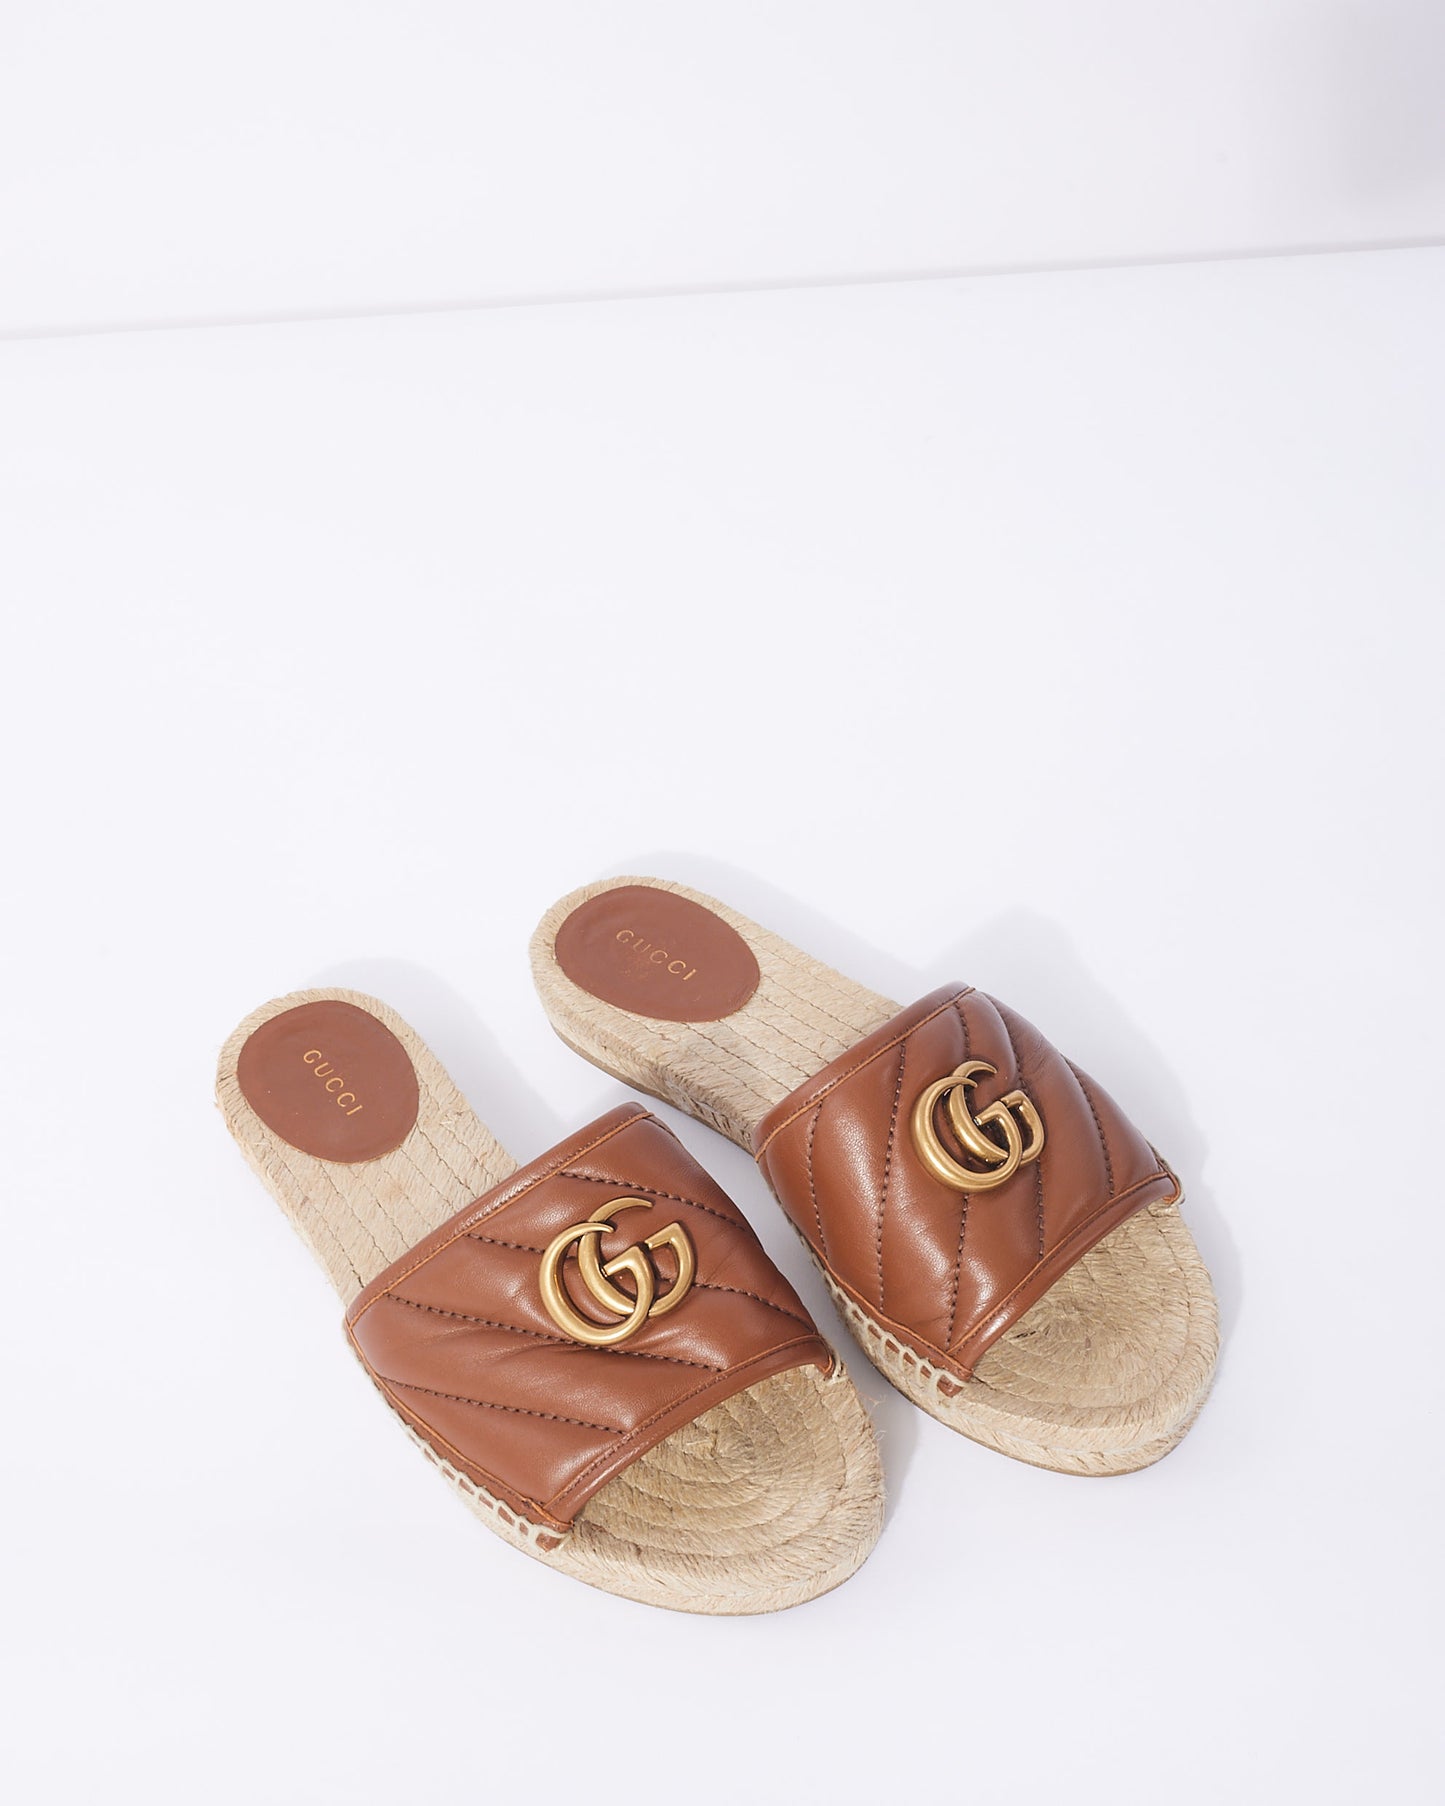 Gucci Brown Leather GG Marmont Espadrille Slide Sandals - 38.5